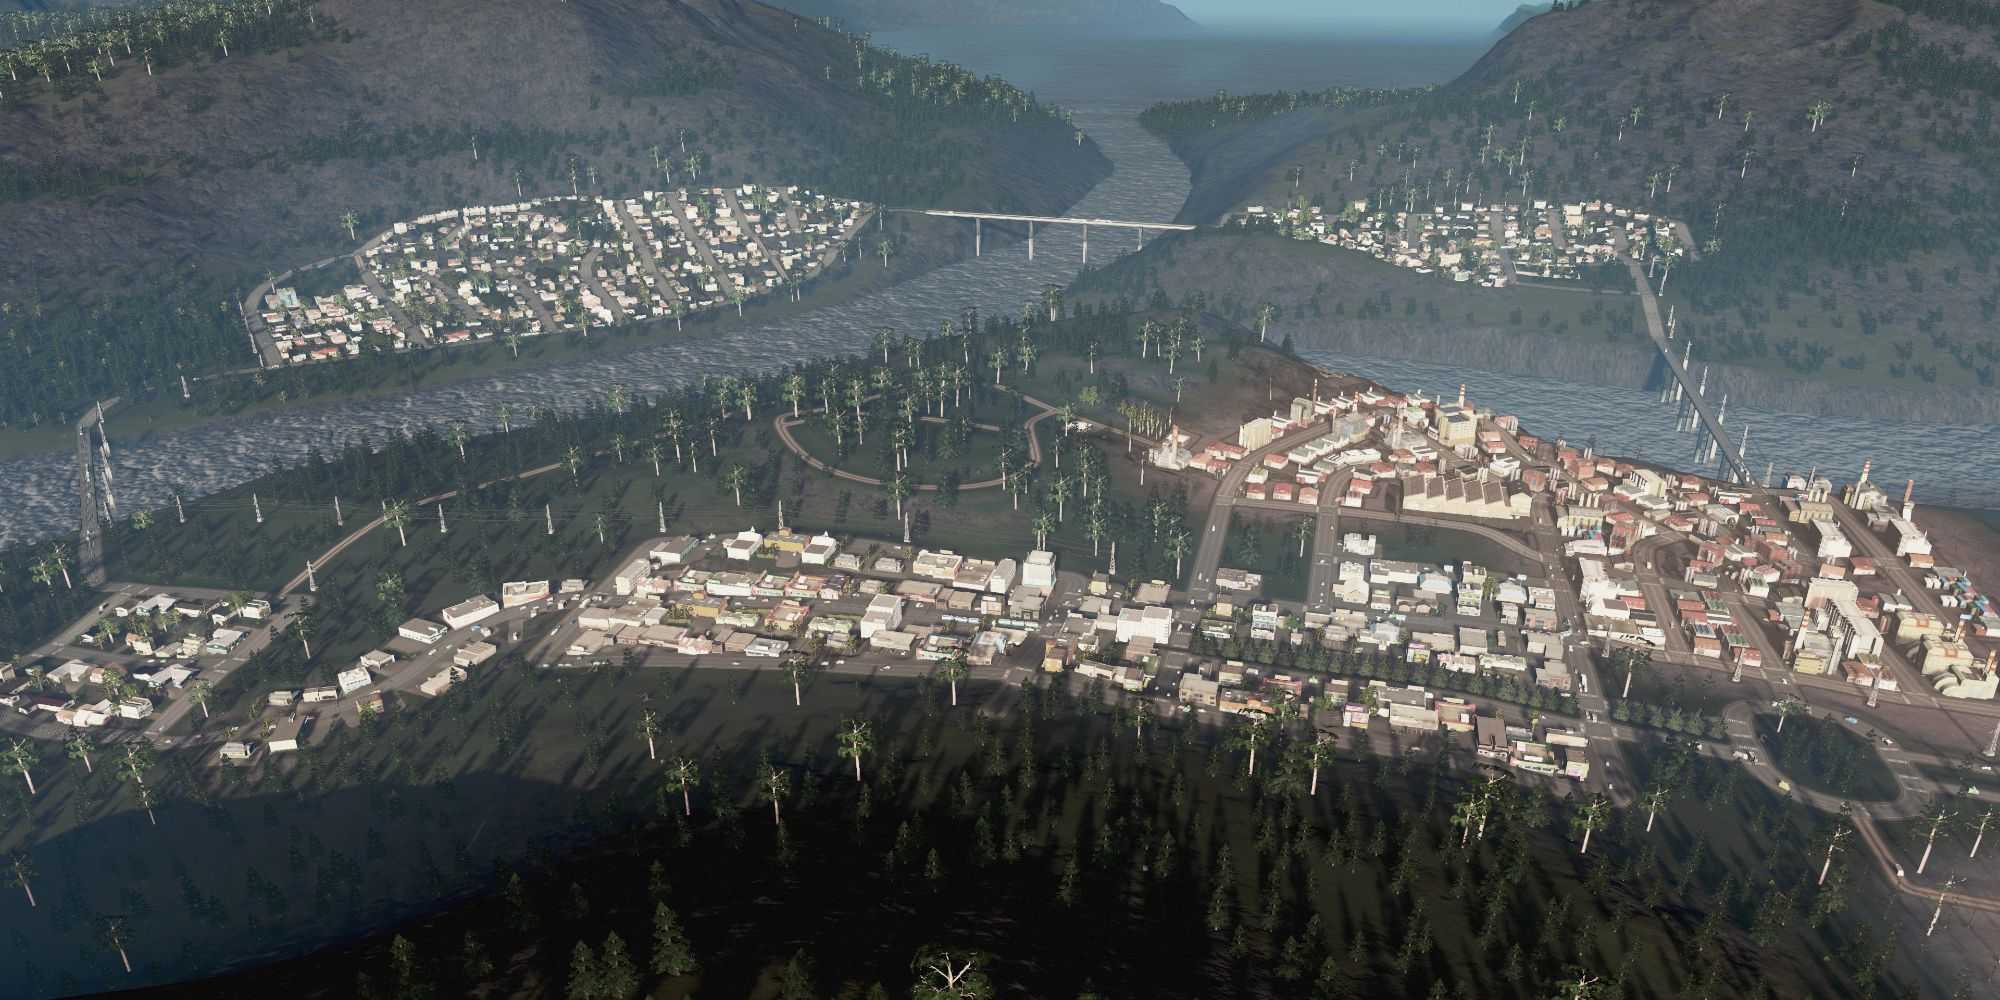 An image of three small towns from the Alpine Village scenario in Cities: Skylines.  These three cities are located on top of mountains and are connected by public transport.